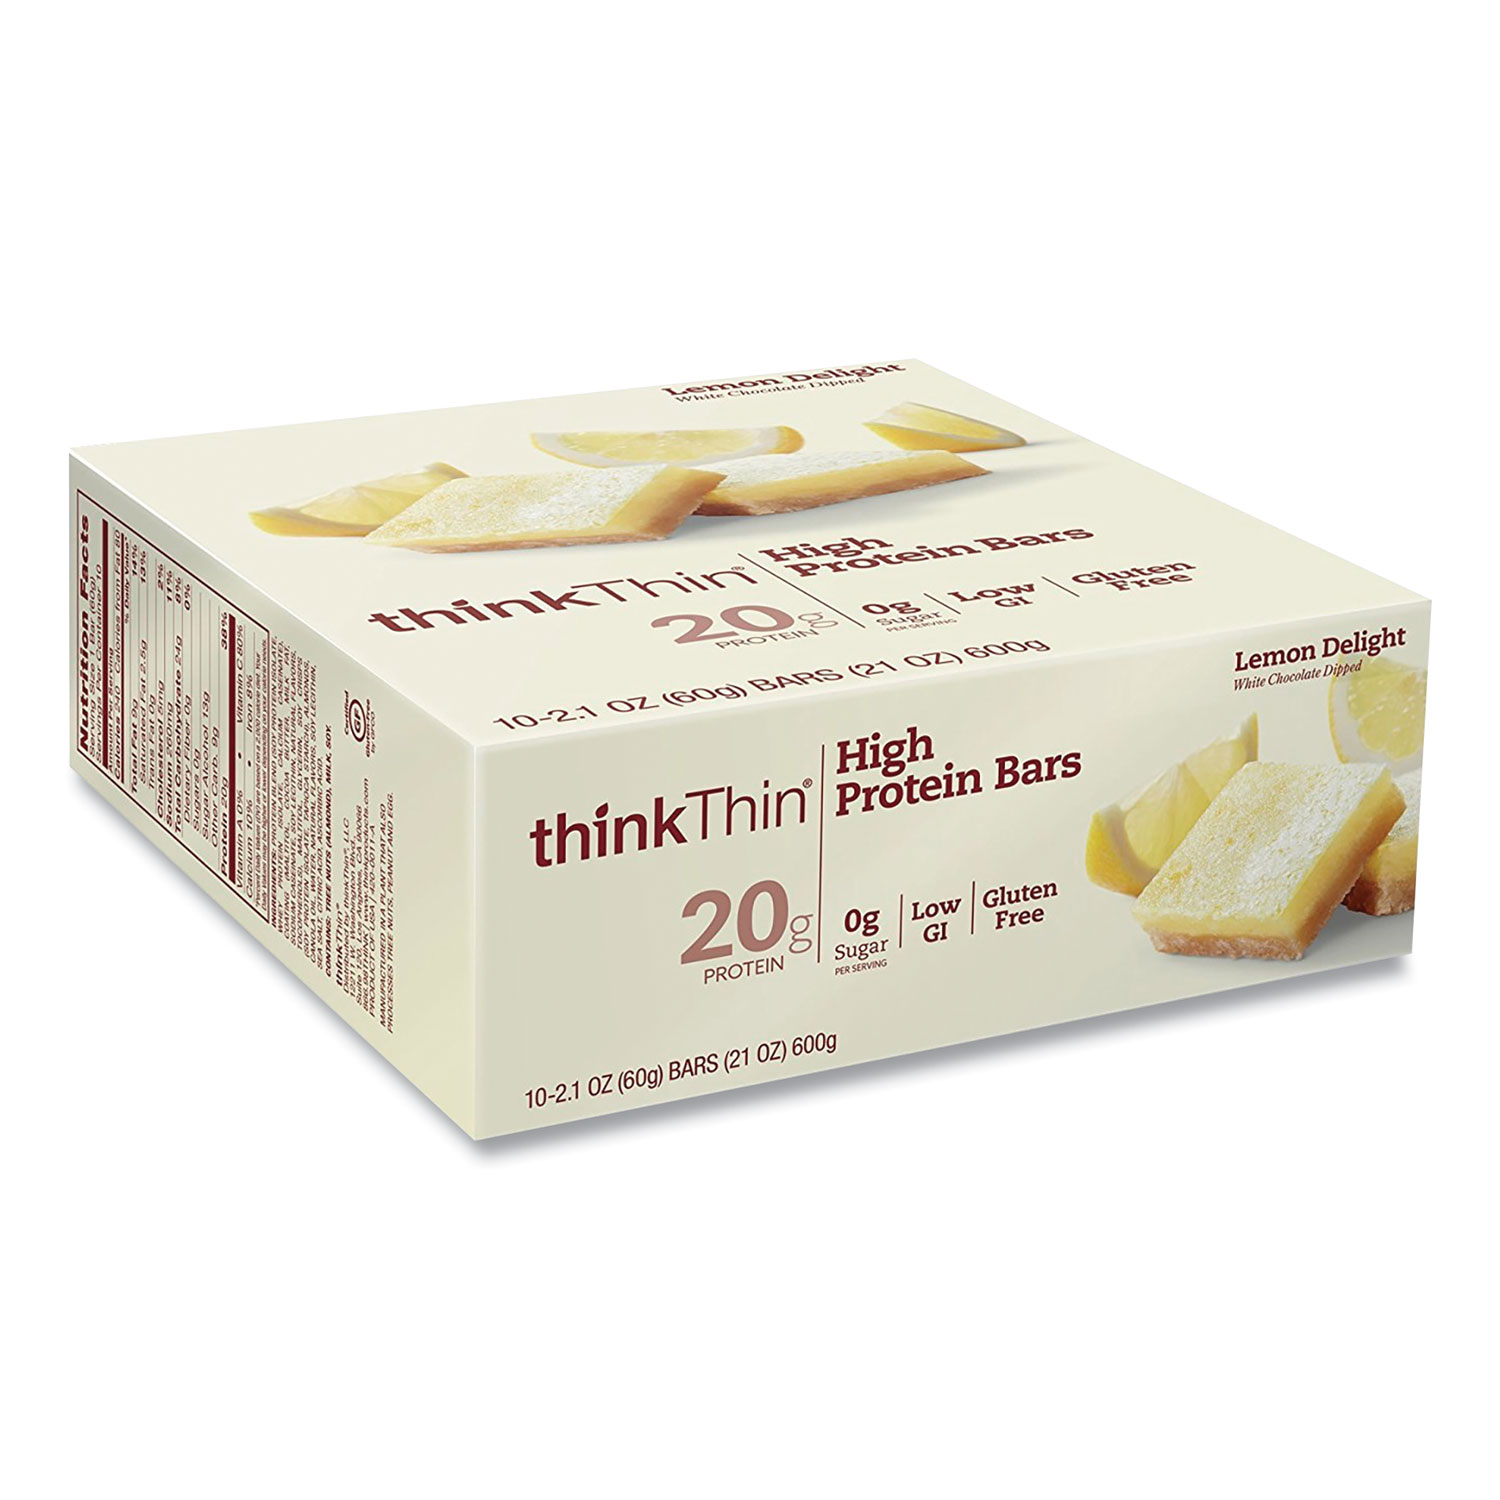  thinkThin 71203 High Protein Bars, Lemon Delight, 2.1 oz Bar, 10 Bars/Carton, Free Delivery in 1-4 Business Days (GRR20902479) 